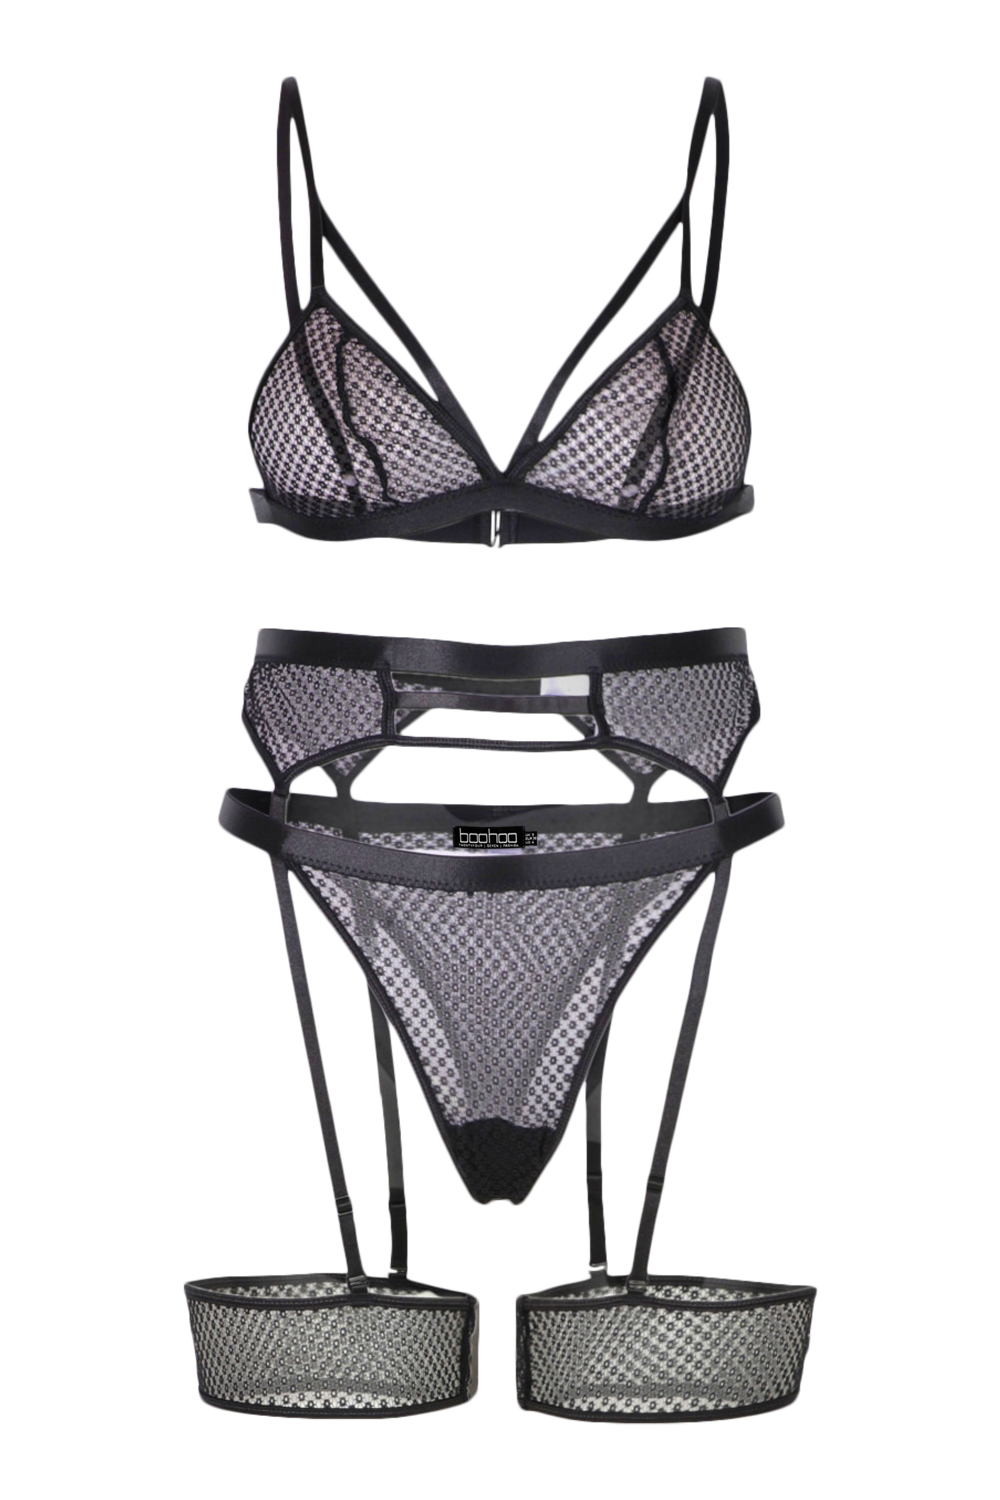 Women's Strapping 3 Piece Lingerie Set